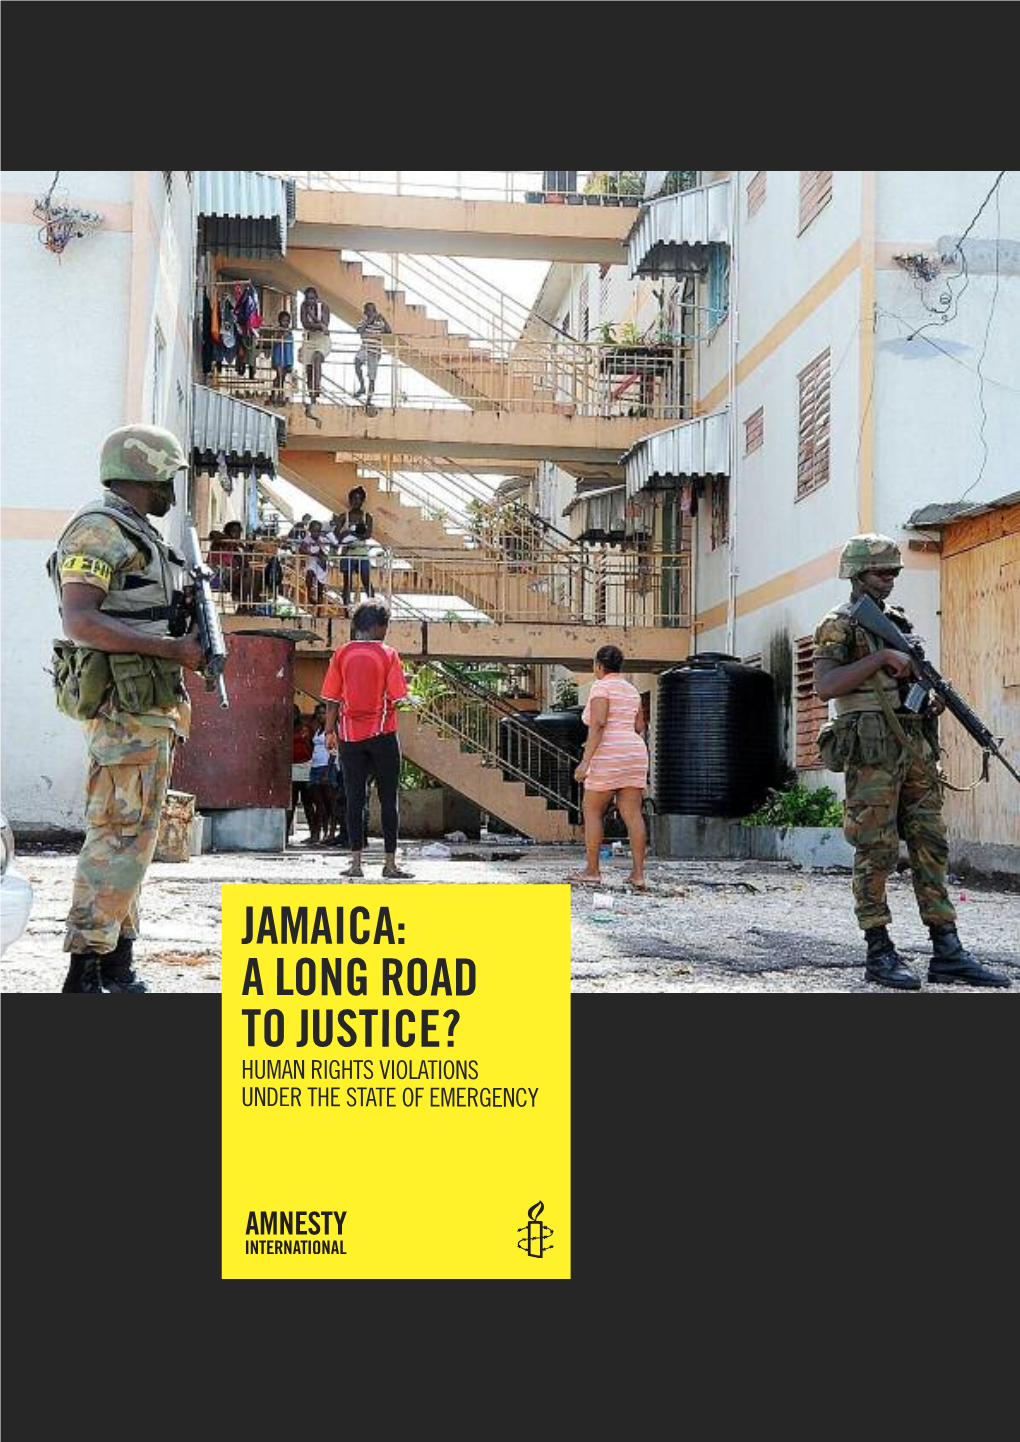 Jamaica: a Long Road to Justice? 5 Human Rights Violations Under the State of Emergency